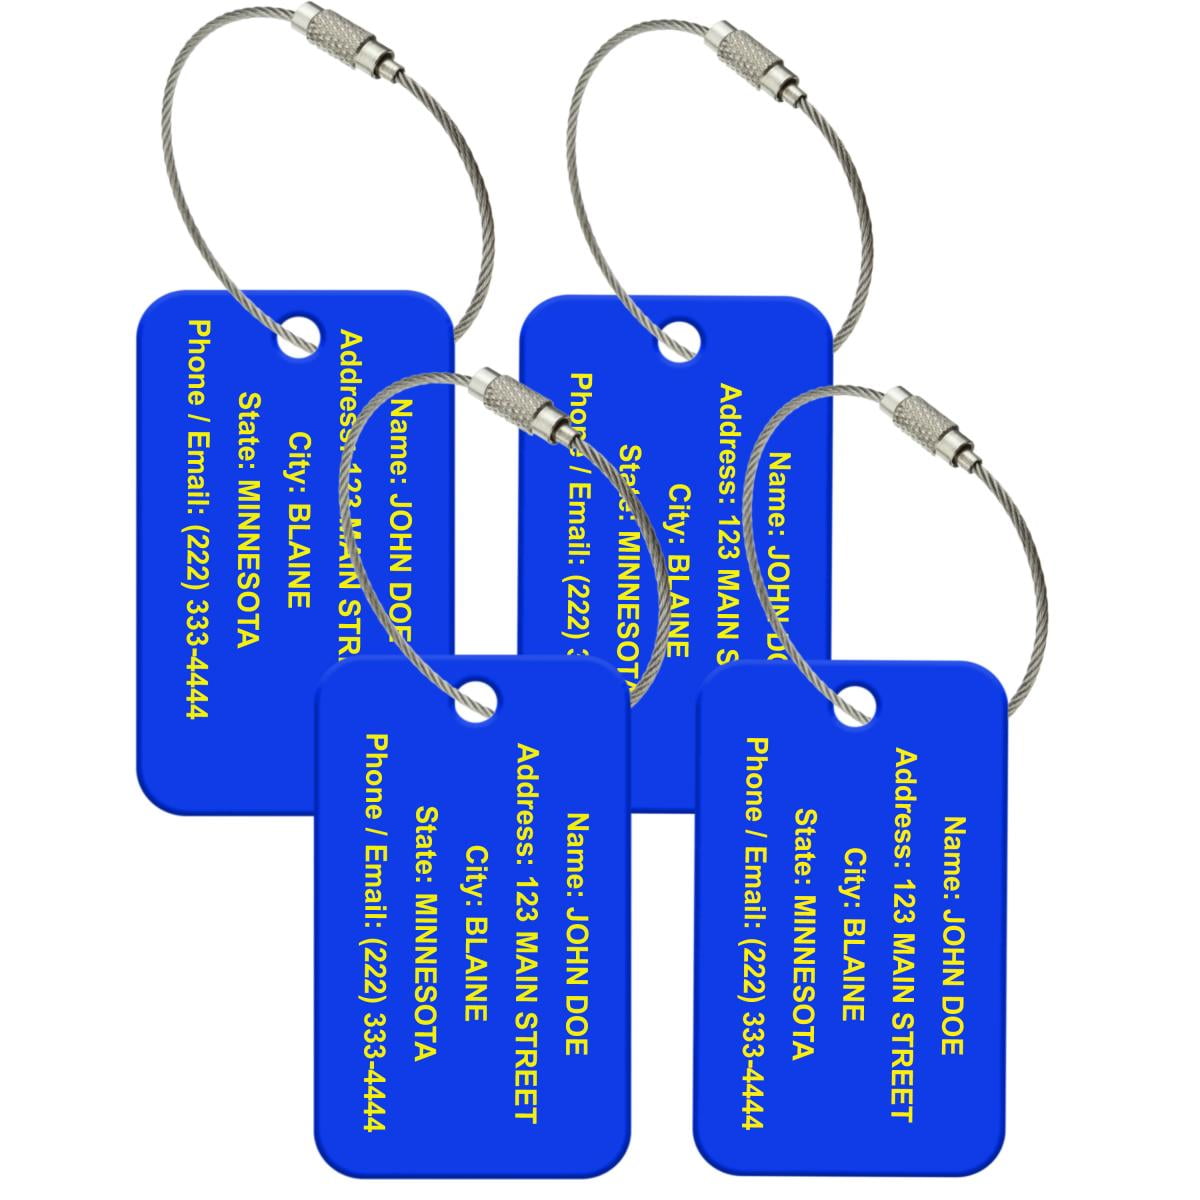 Custom Luggage Tags used for Travel Tags for Luggage, Luggage Tags for  Suitcases, Travel Luggage. Eye Catching High Visibility High Impact  Acrylic. Includes a Wire Ring Loop - Blue/Yellow - Walmart.com